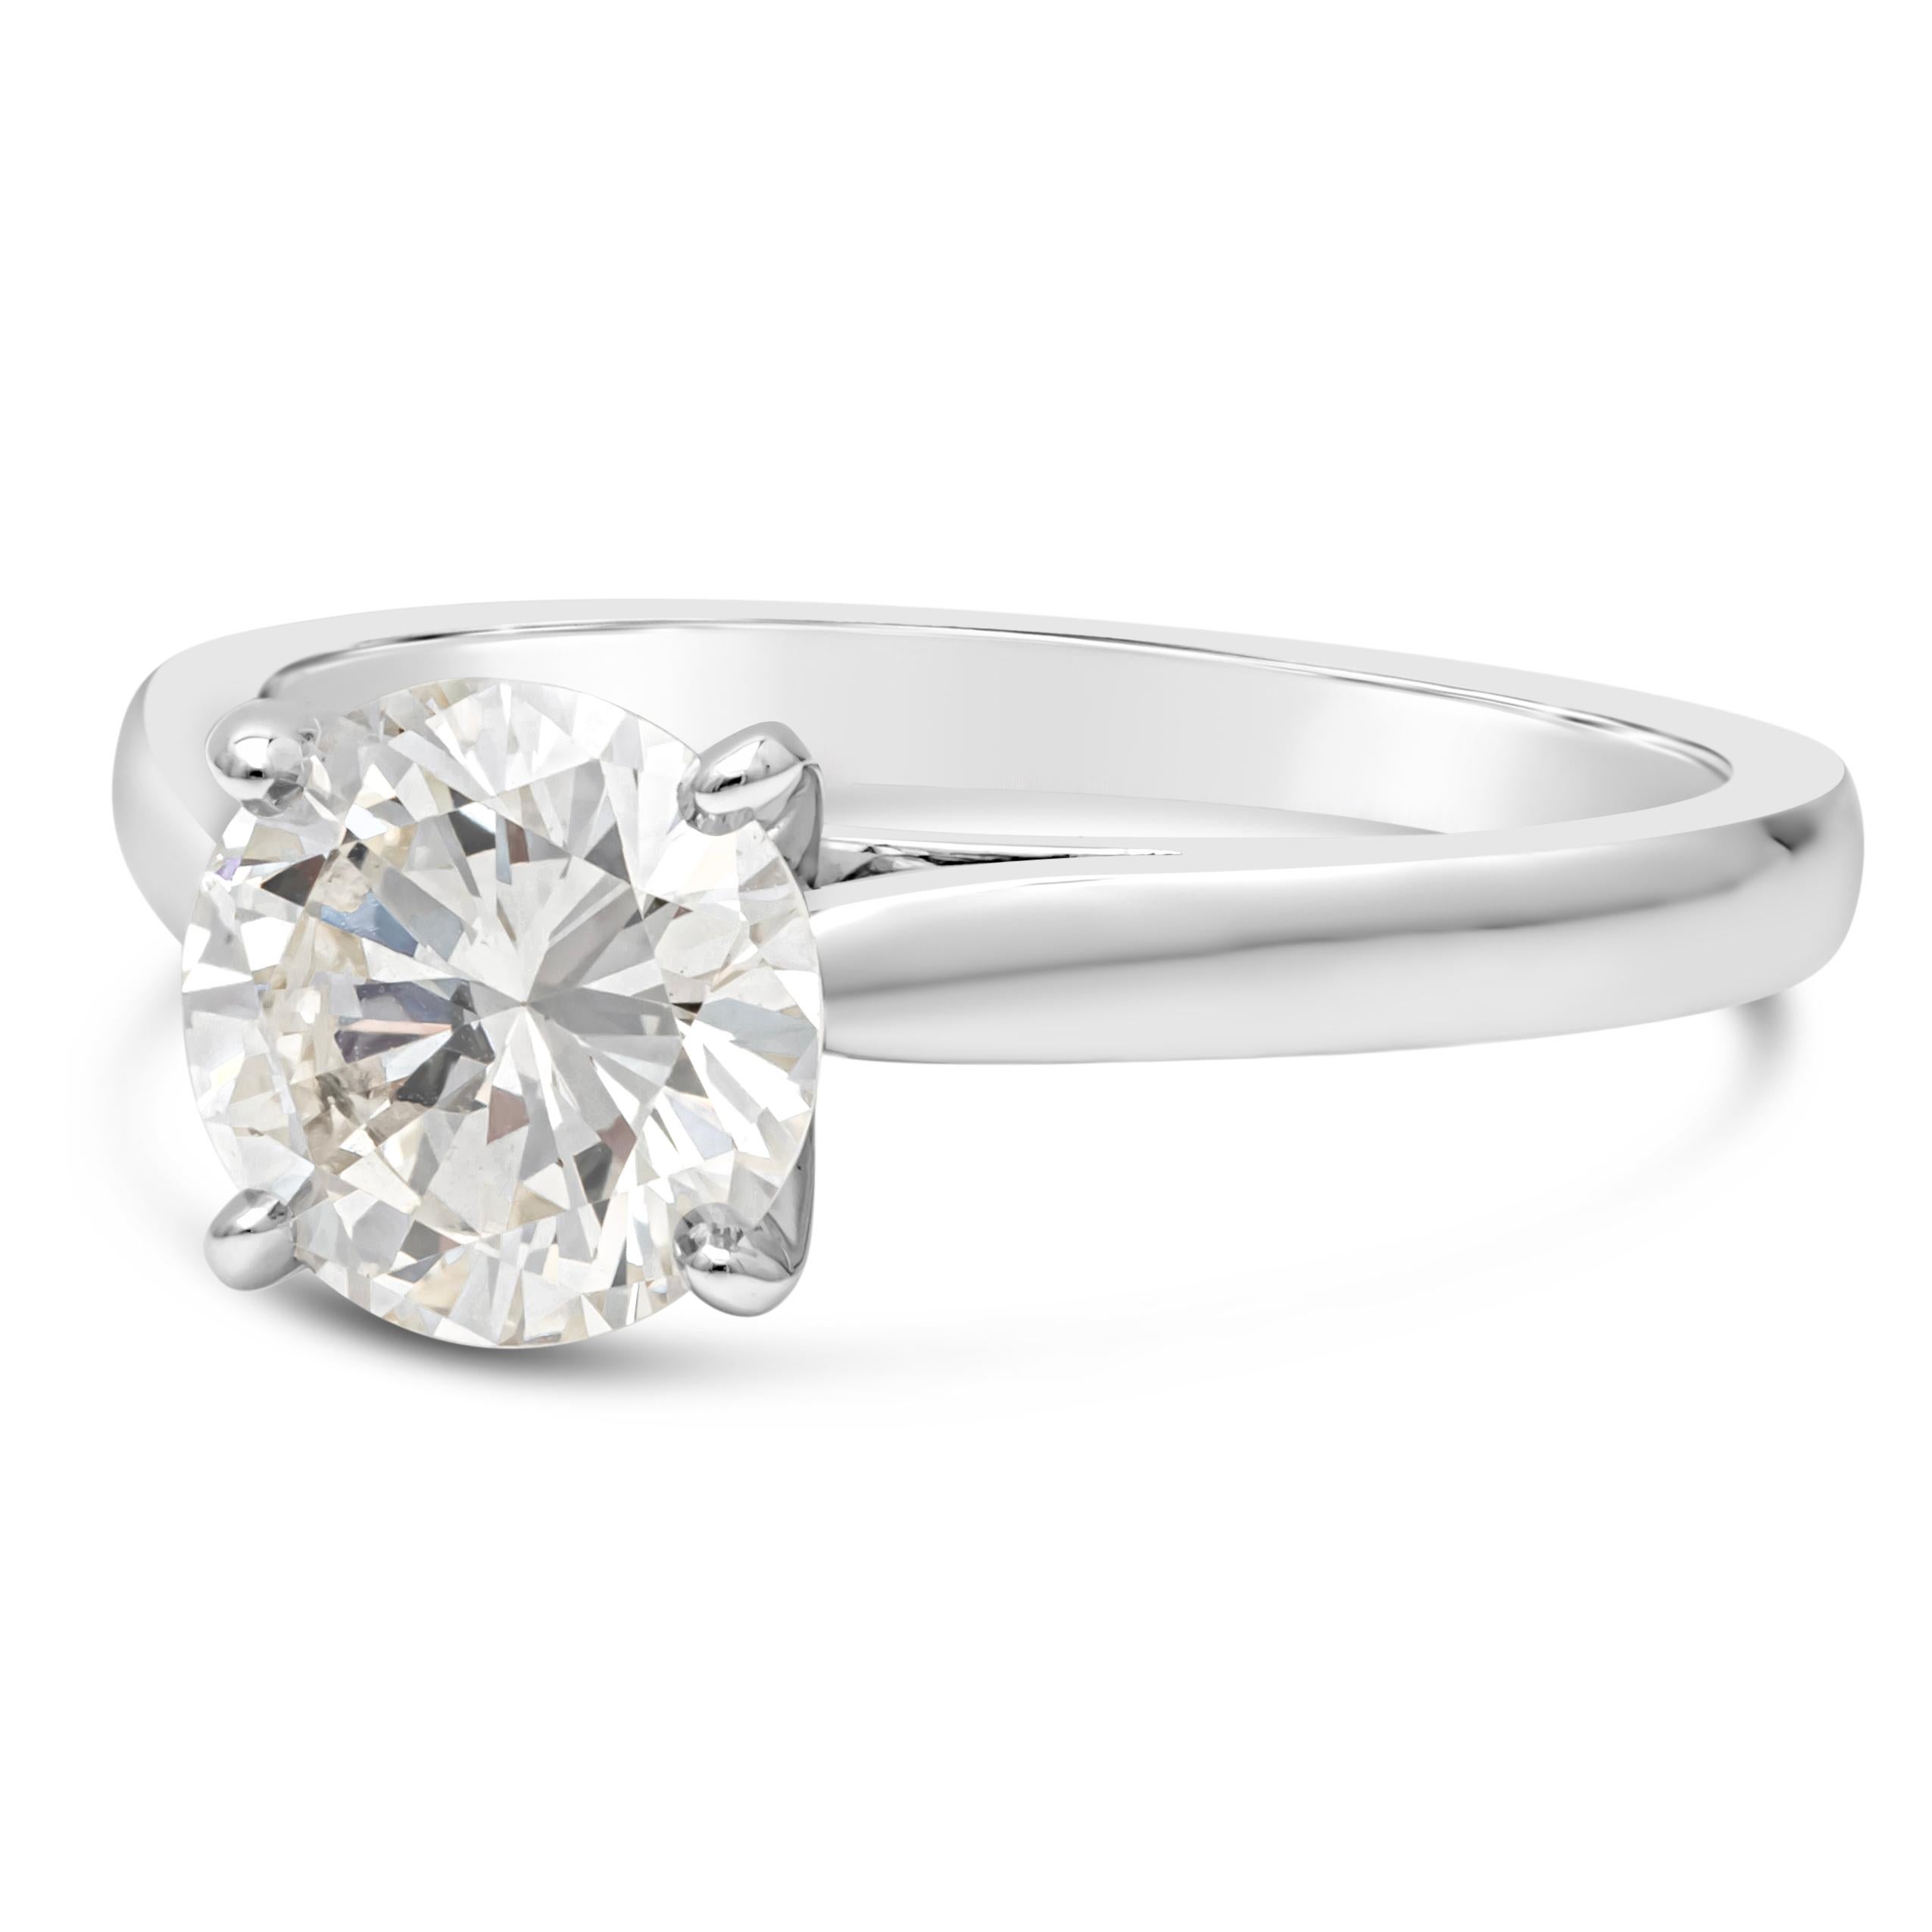 A classic solitaire engagement ring showcasing a 1.30 carat round brilliant diamond,  GIA certified as I Color and SI1 in clarity.  Set in a four prong basket setting. Finely made in 14K White Gold. Size 5.75 US resizable upon request. 

Roman